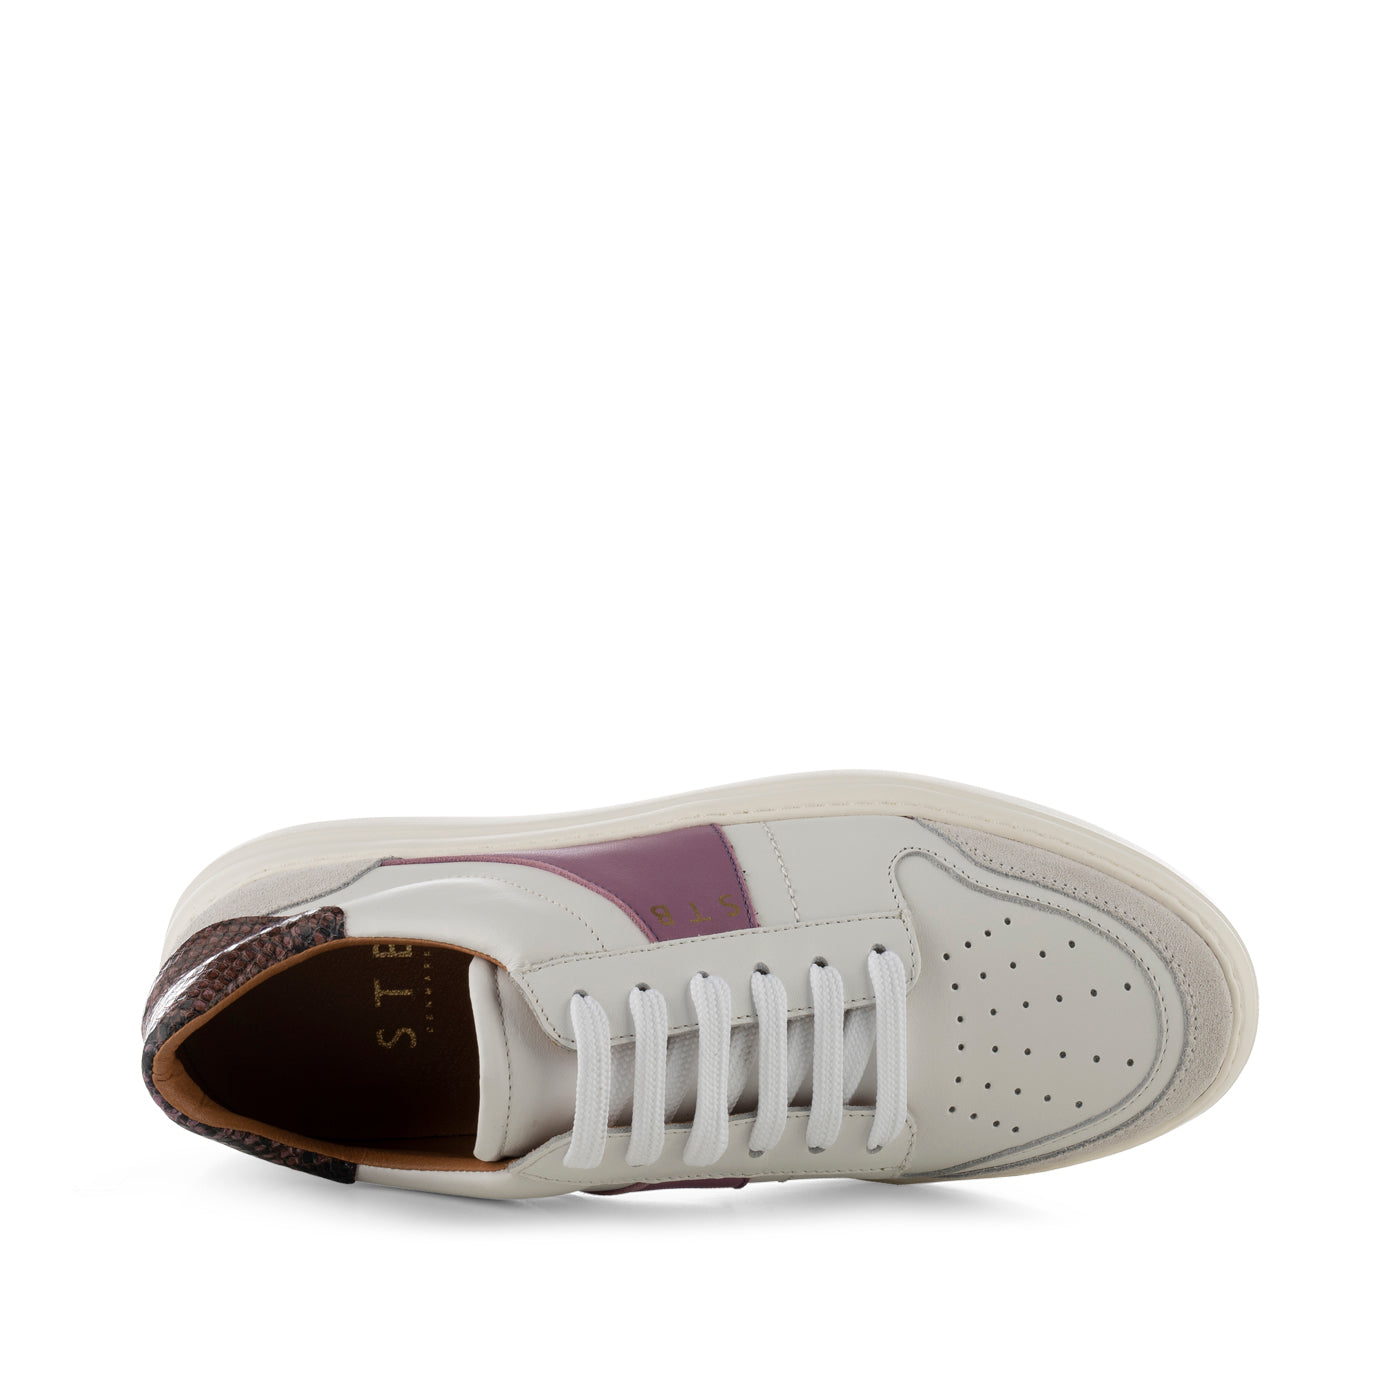 SHOE THE BEAR WOMENS Valda sneaker suede leather Sneakers 837 WHITE/LAVENDER MULTI